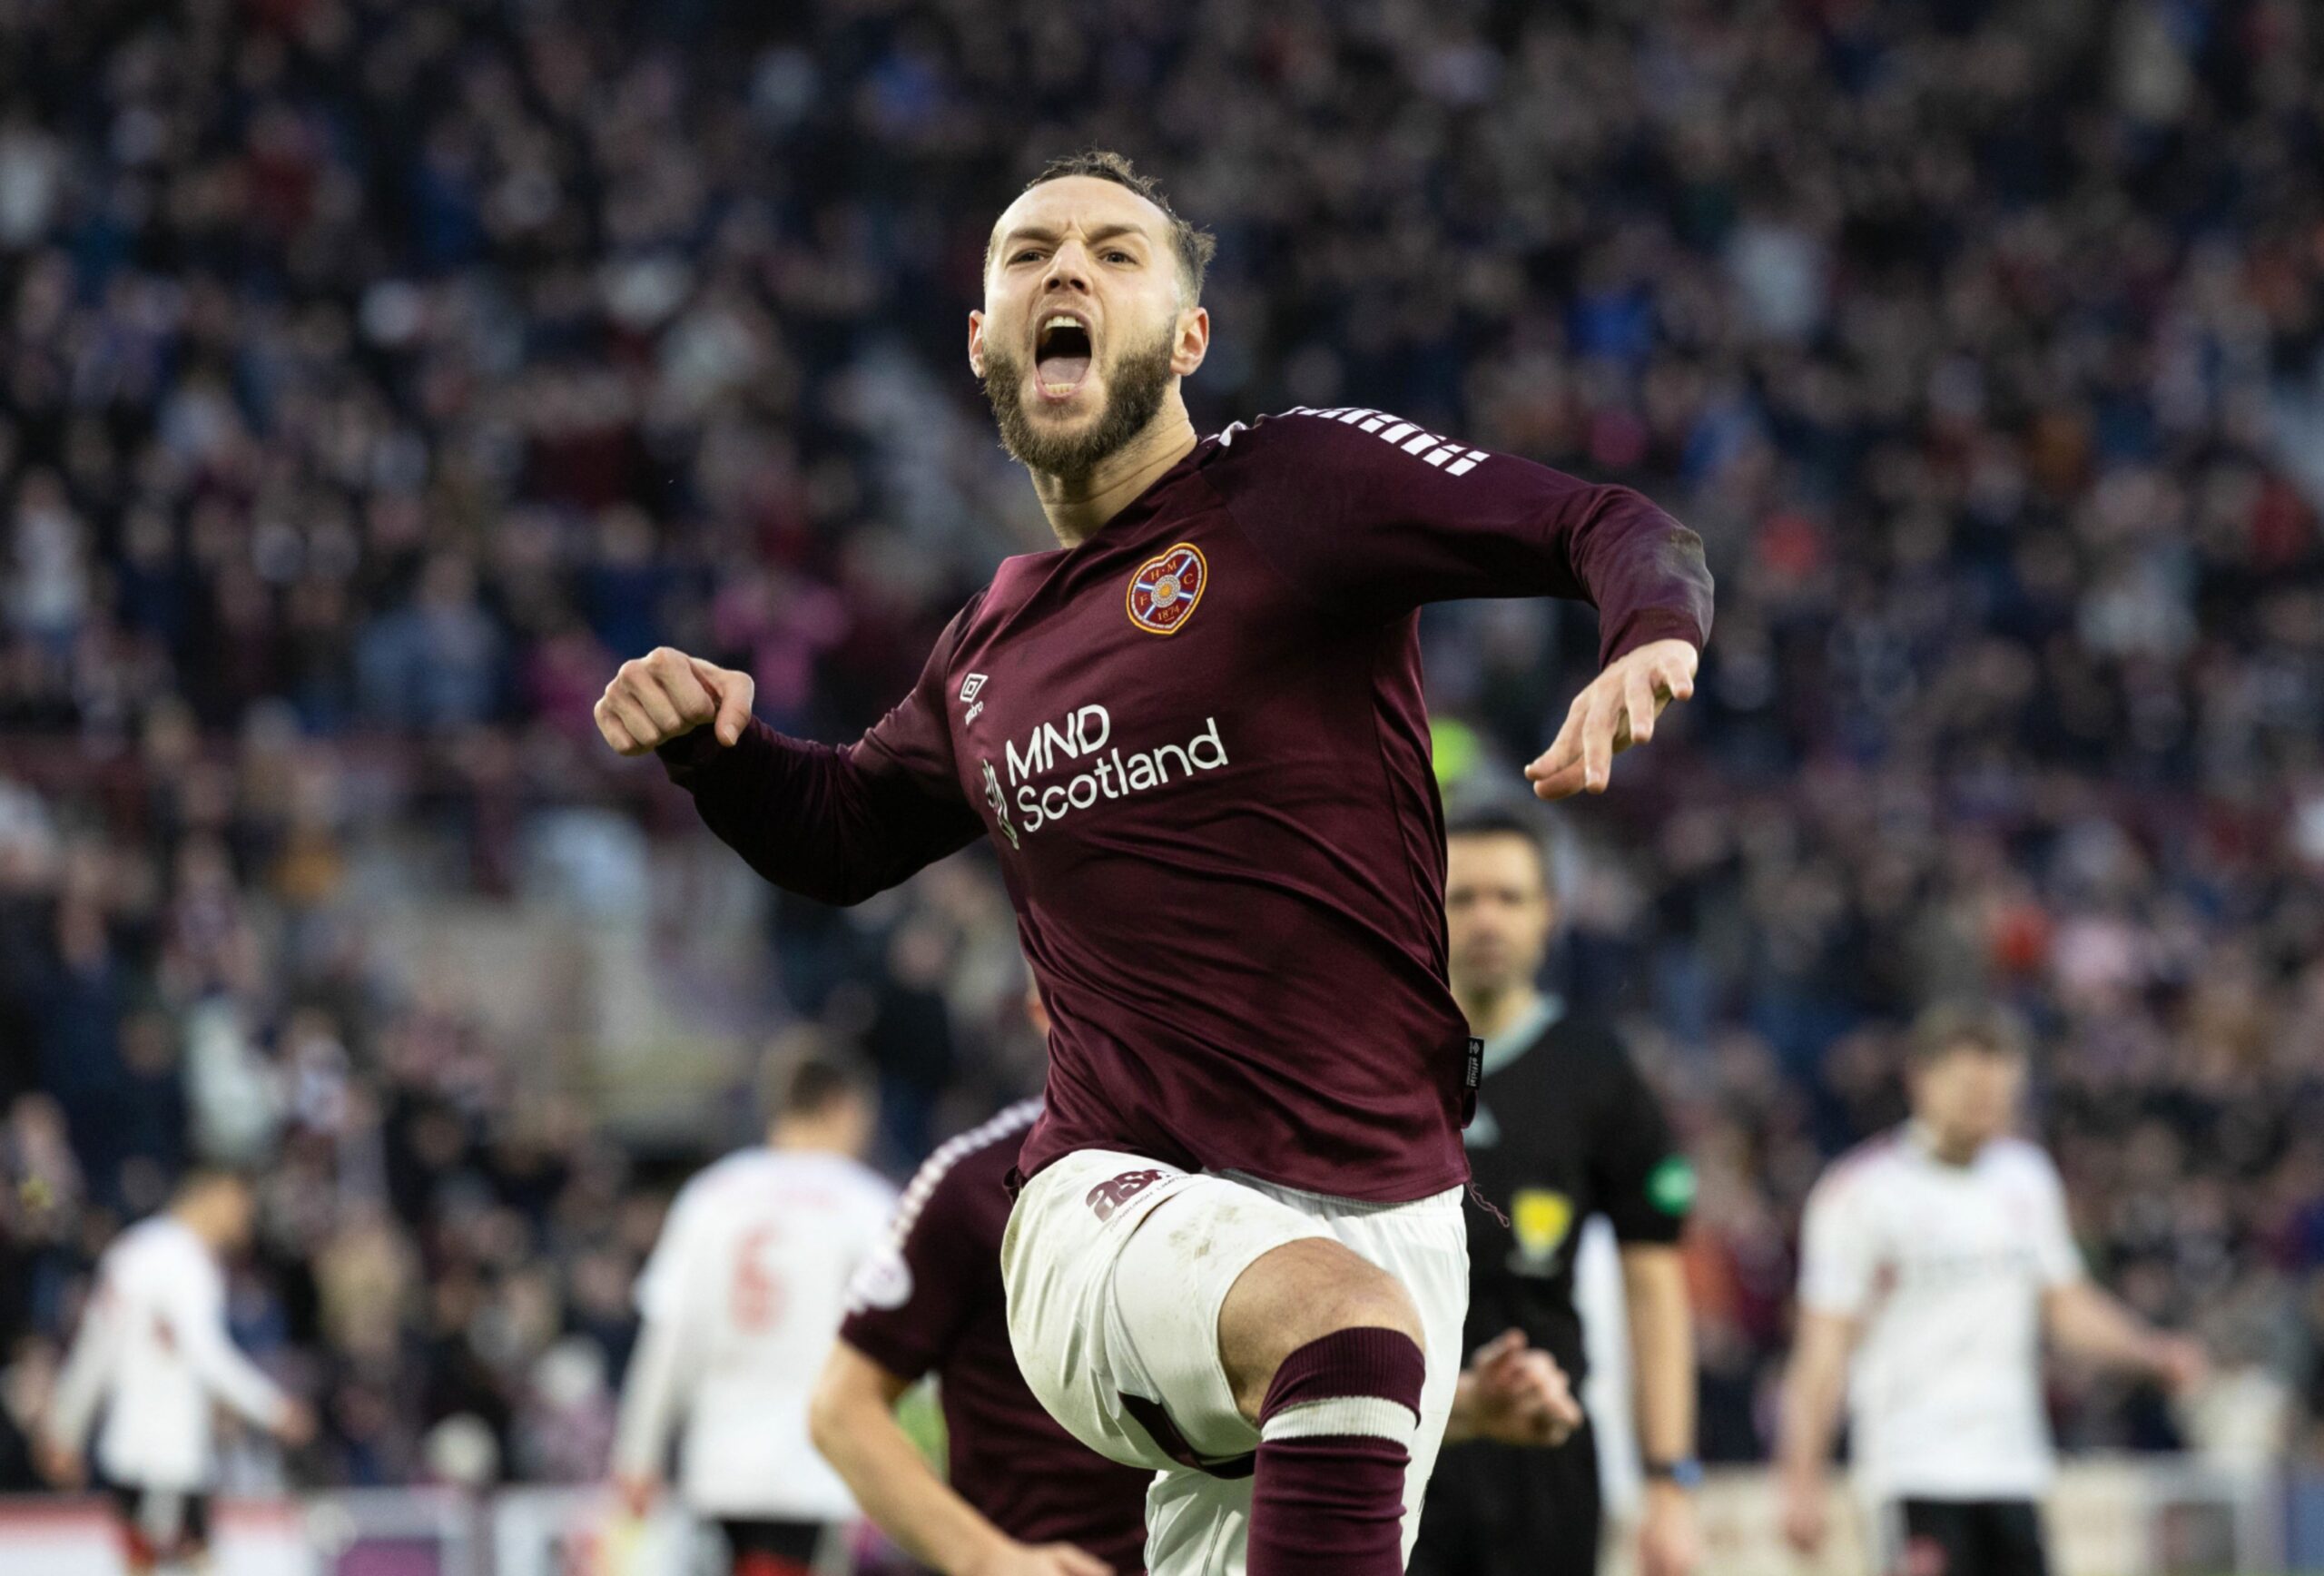 Hearts' Jorge Grant celebrates after scoring to make it 1-0 against Aberdeen.